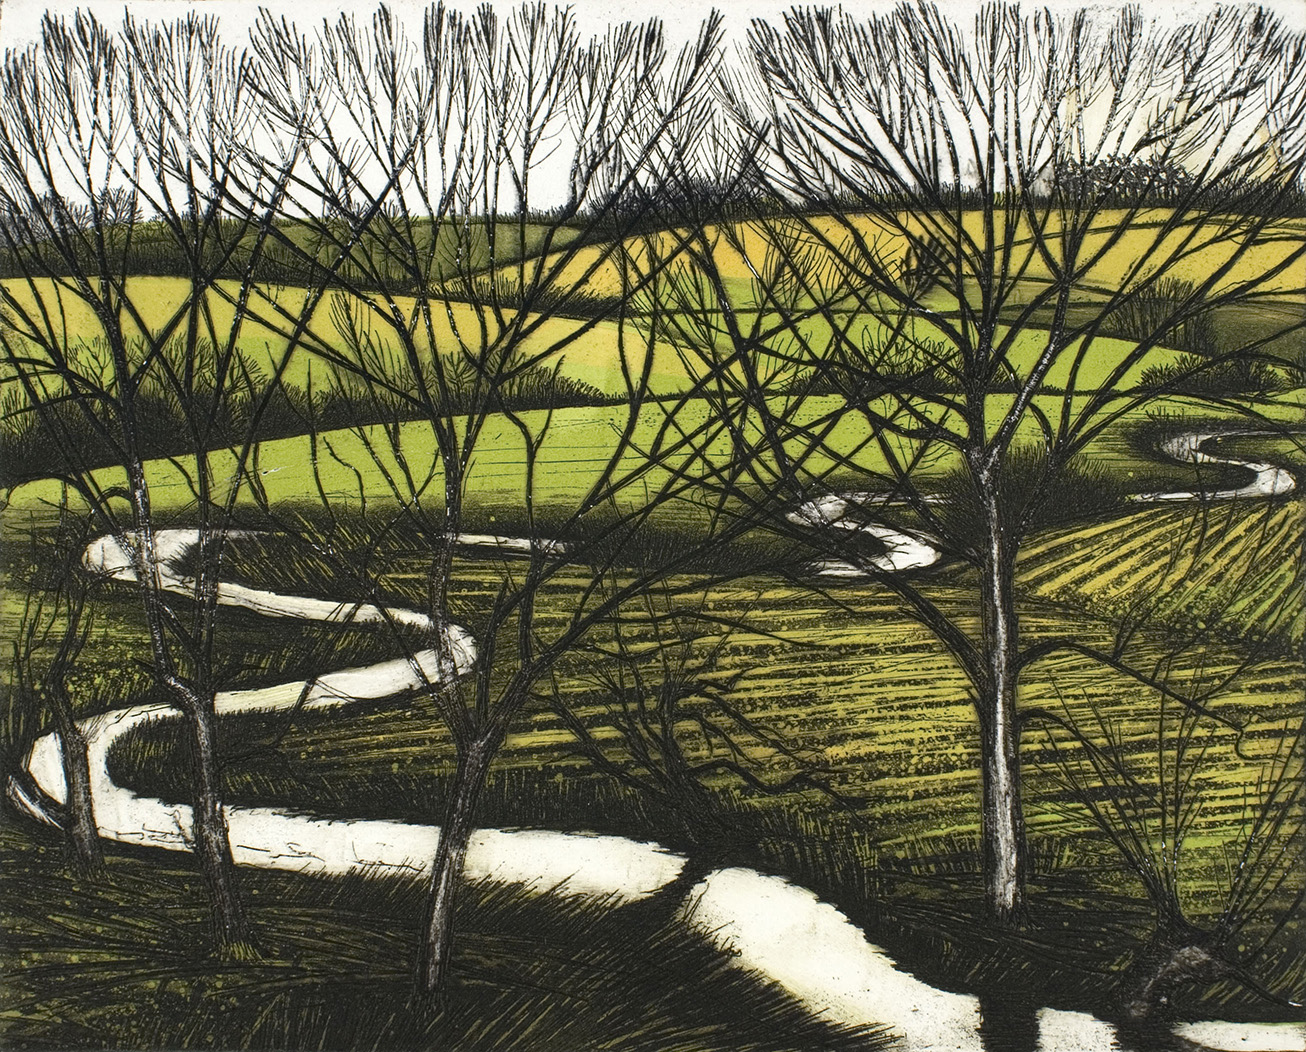 'Through the Trees' by Morna Rhys